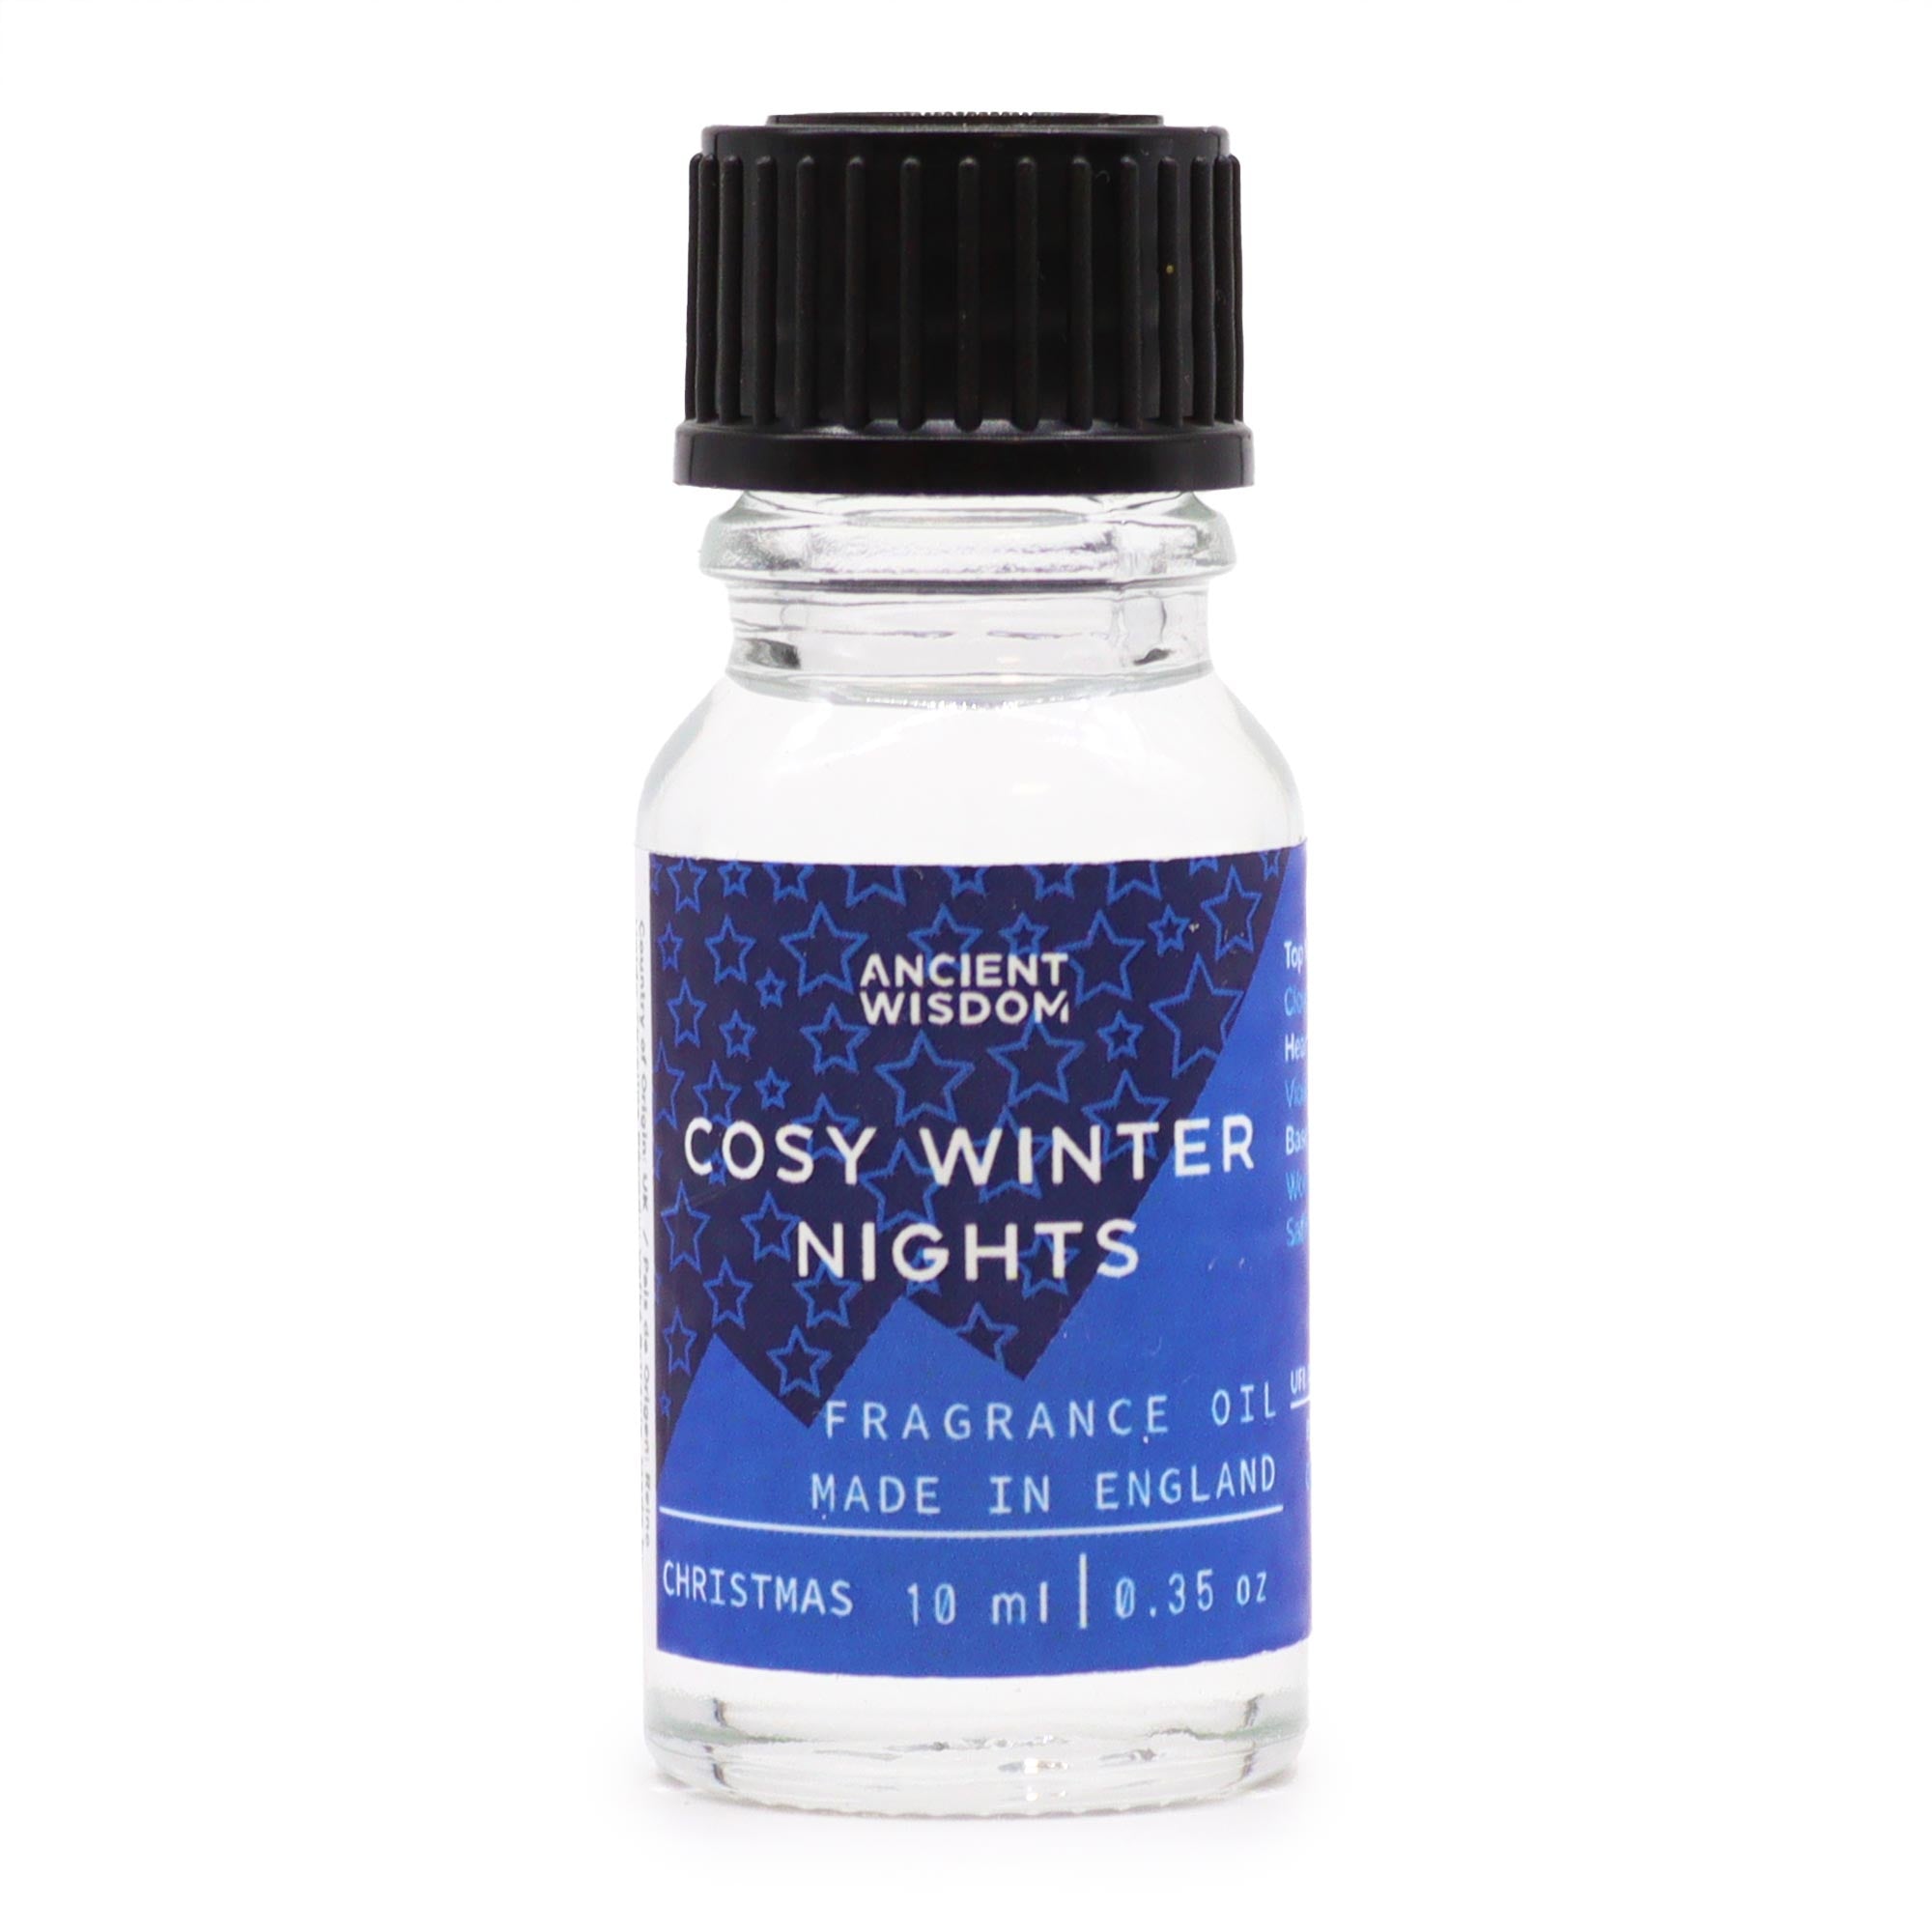 View Cosy Winter Nights Fragrance Oil 10ml information